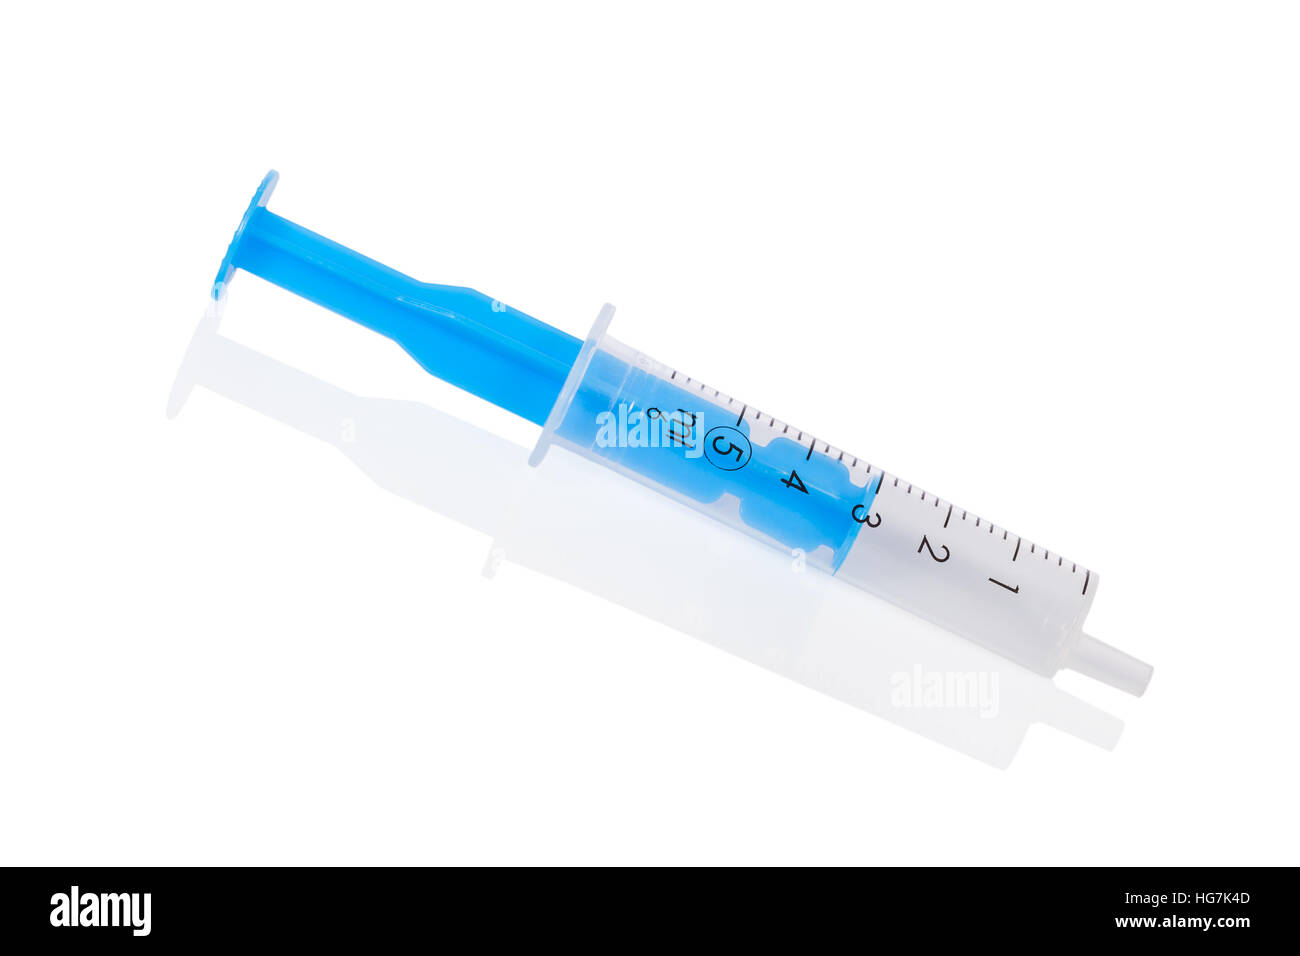 Small disposable syringe made of plastic, with a half full barrel and plunger in the middle of the scale, isolated on white Stock Photo